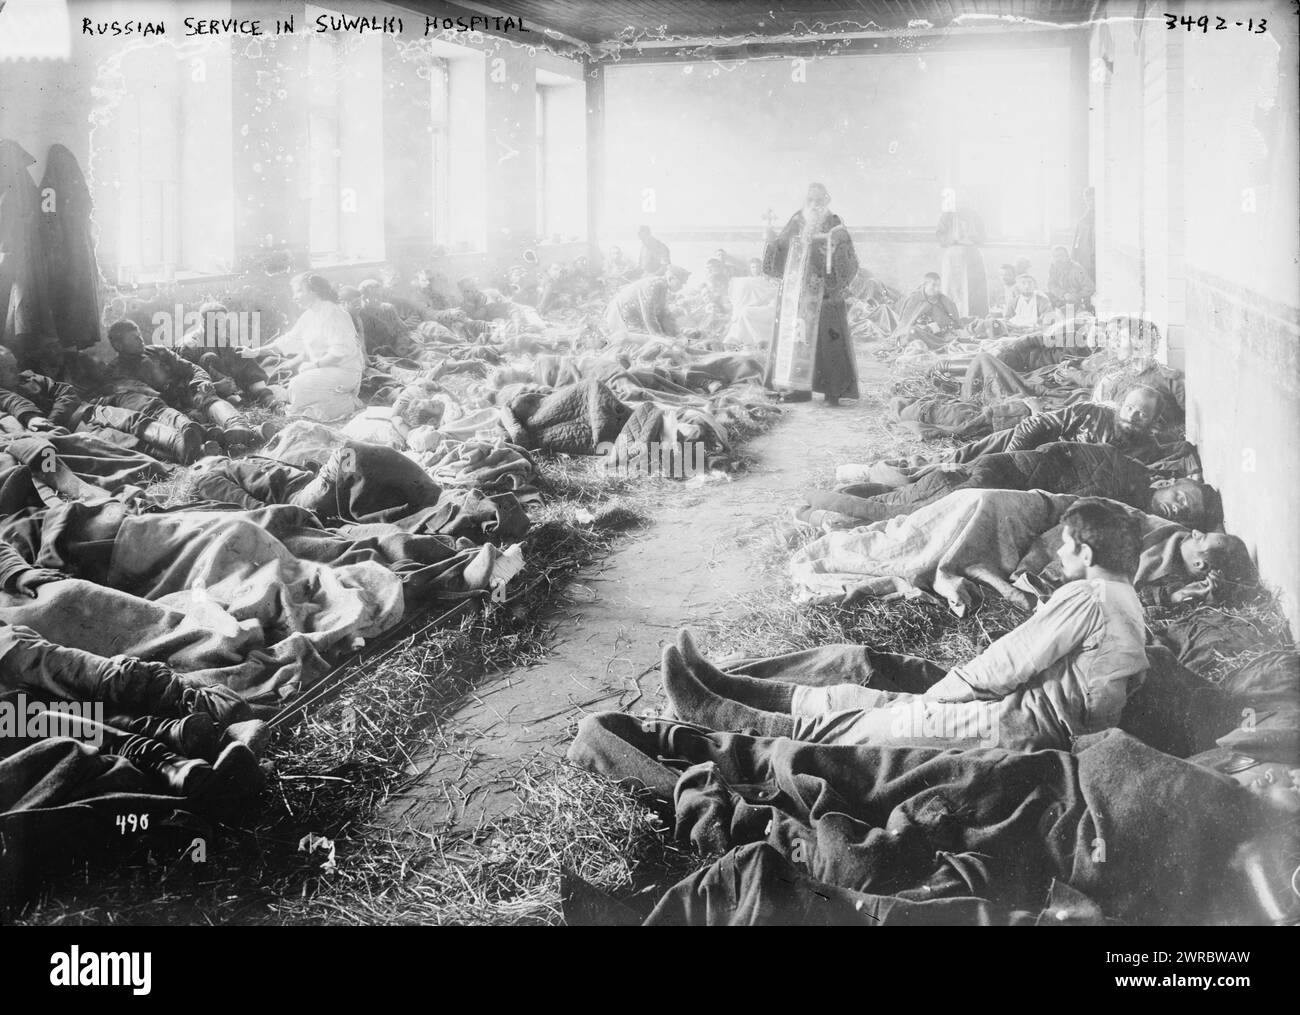 Russian Service in Suwalki Hospital, Photograph shows a priest holding a Russian Orthodox service in a hospital in Suwalki, Russia (now Poland) during World War I., between 1914 and ca. 1915, World War, 1914-1918, Glass negatives, 1 negative: glass Stock Photo